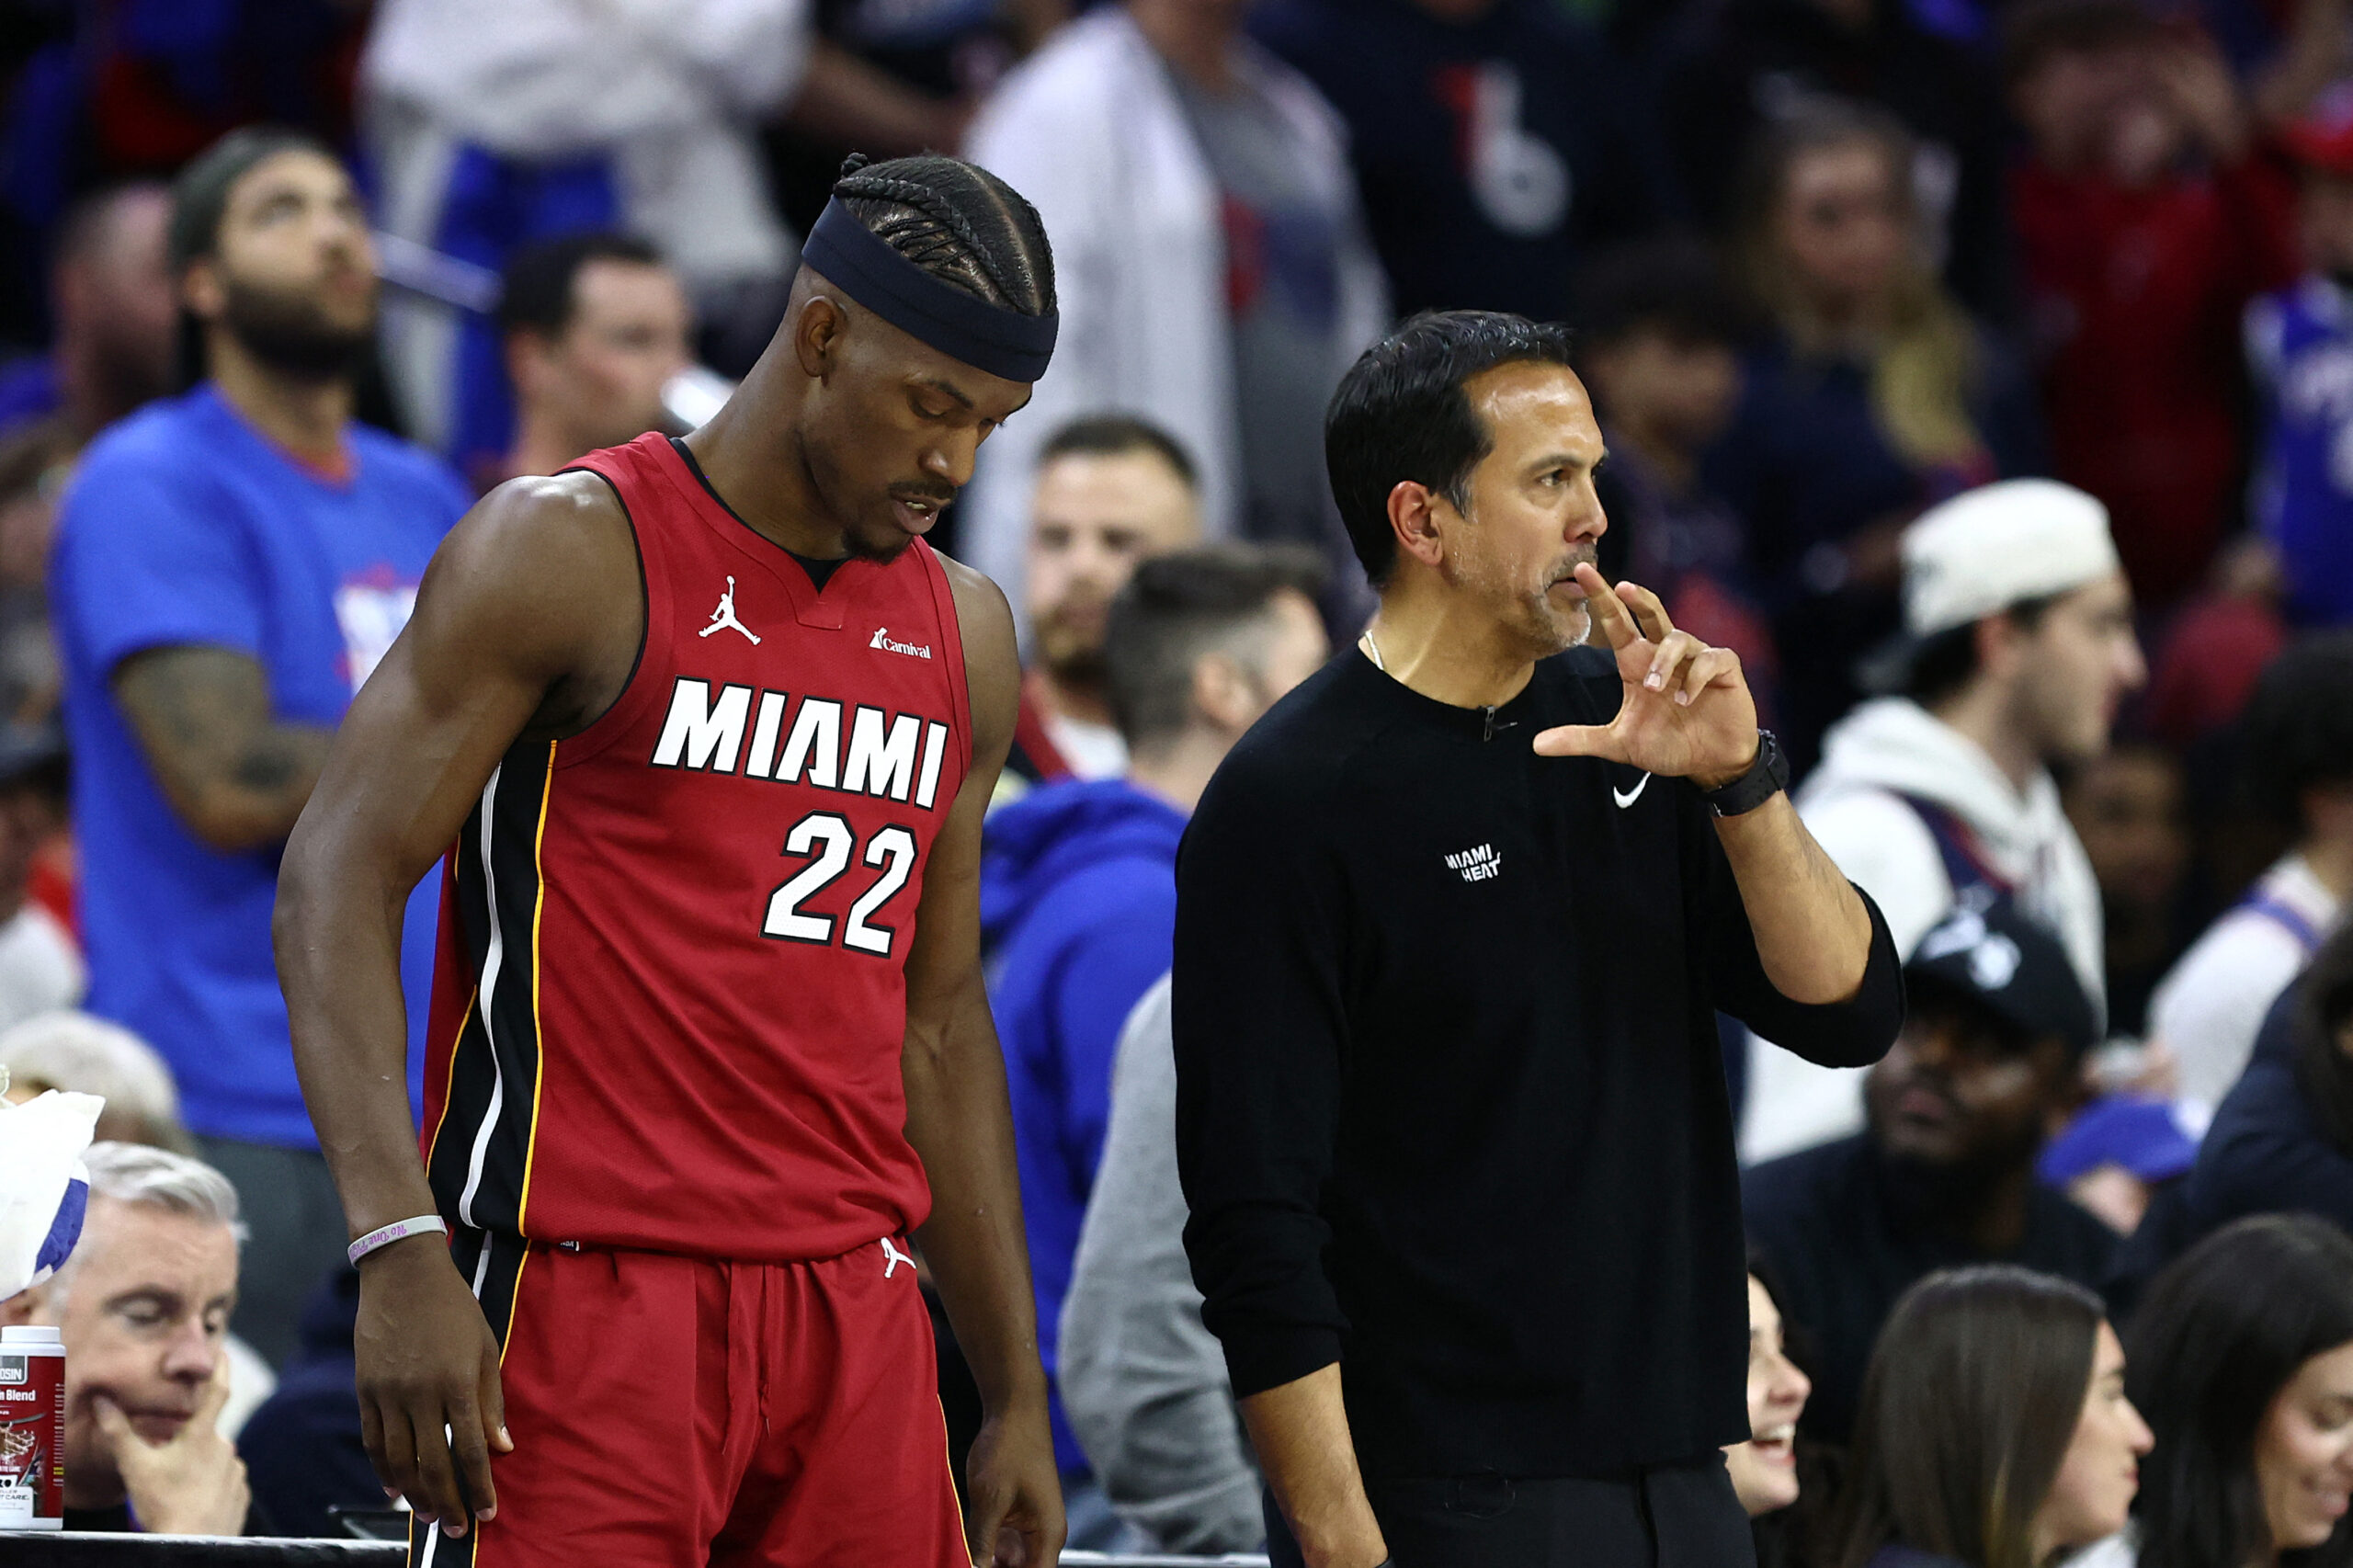 nba: jimmy butler, zion williamson injuries part of play-in finale stories